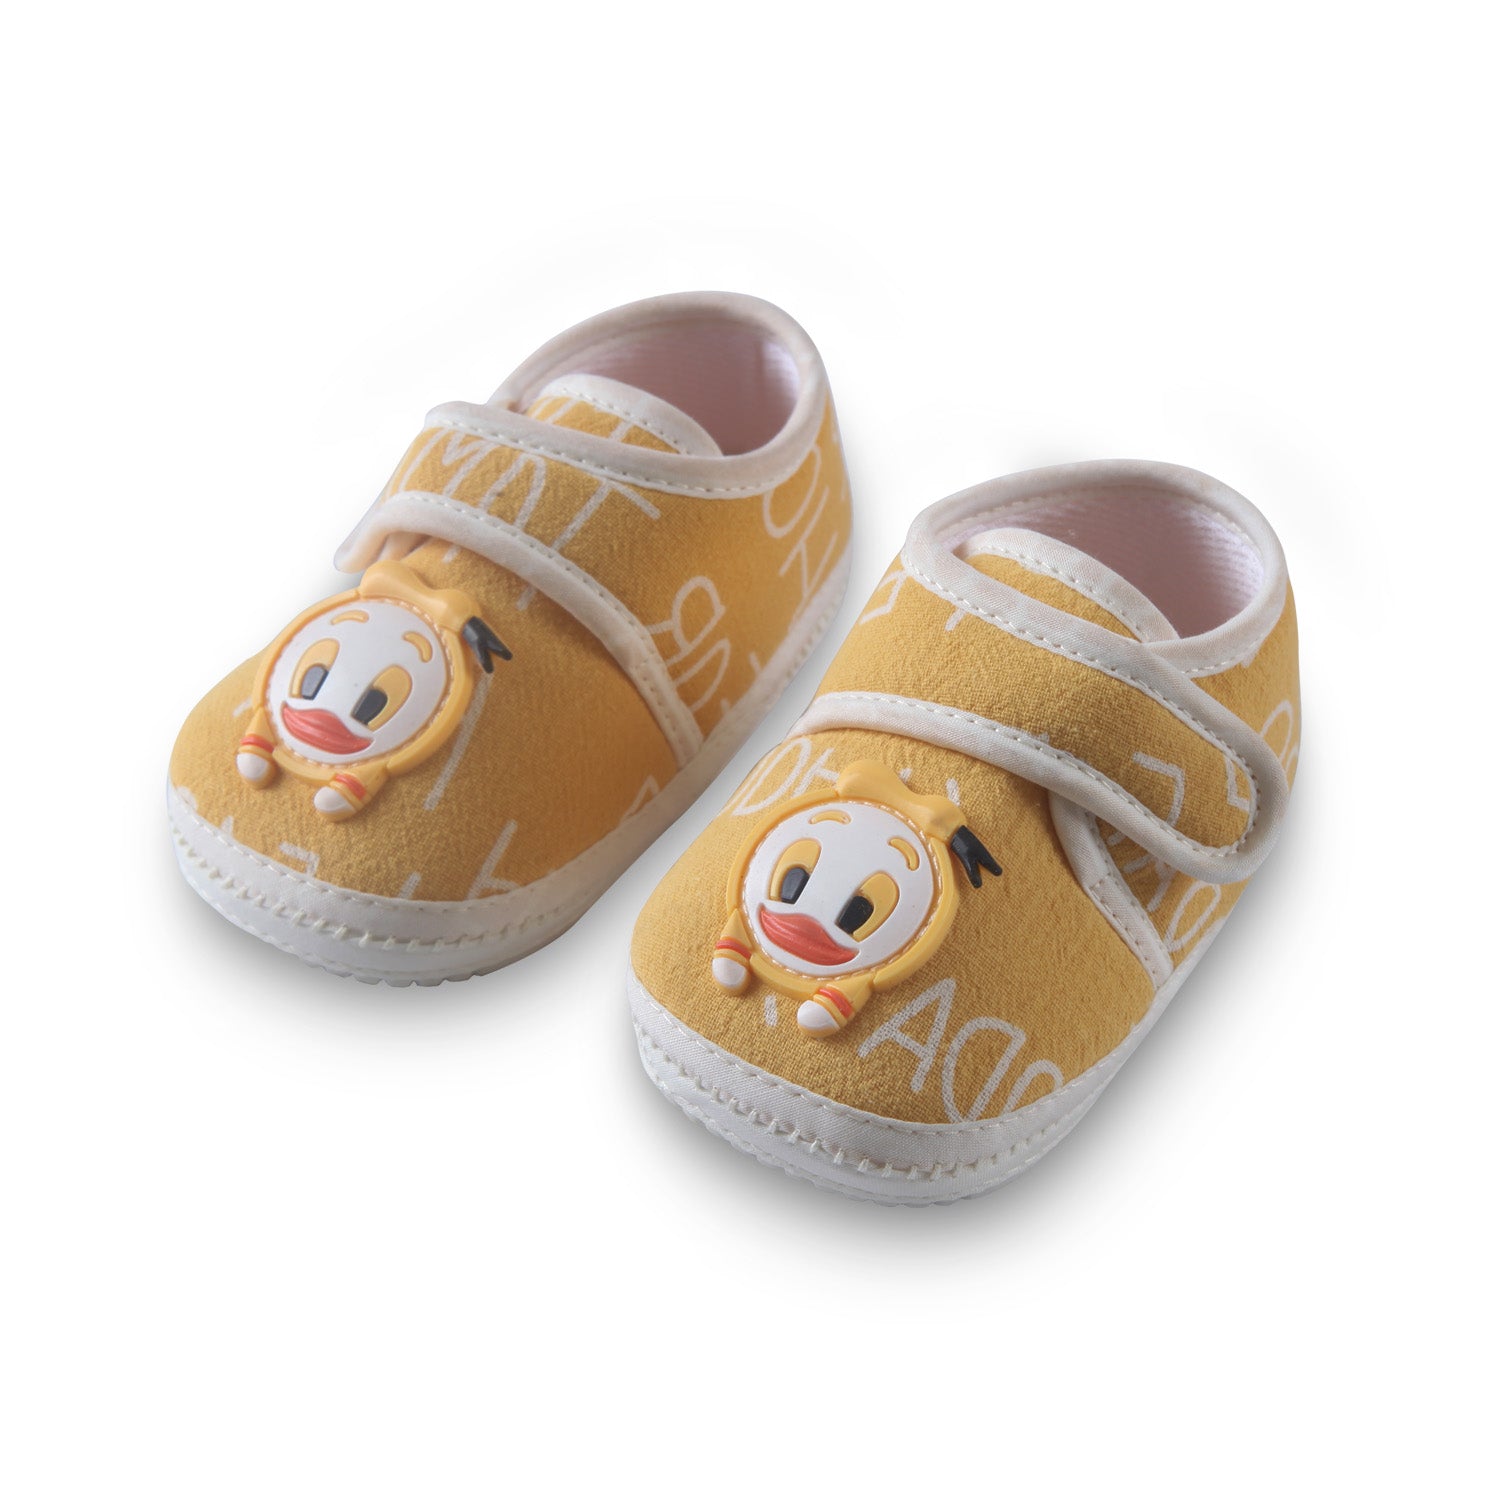 Non-slip Booties with Strap Kids Shoes Duck - Yellow